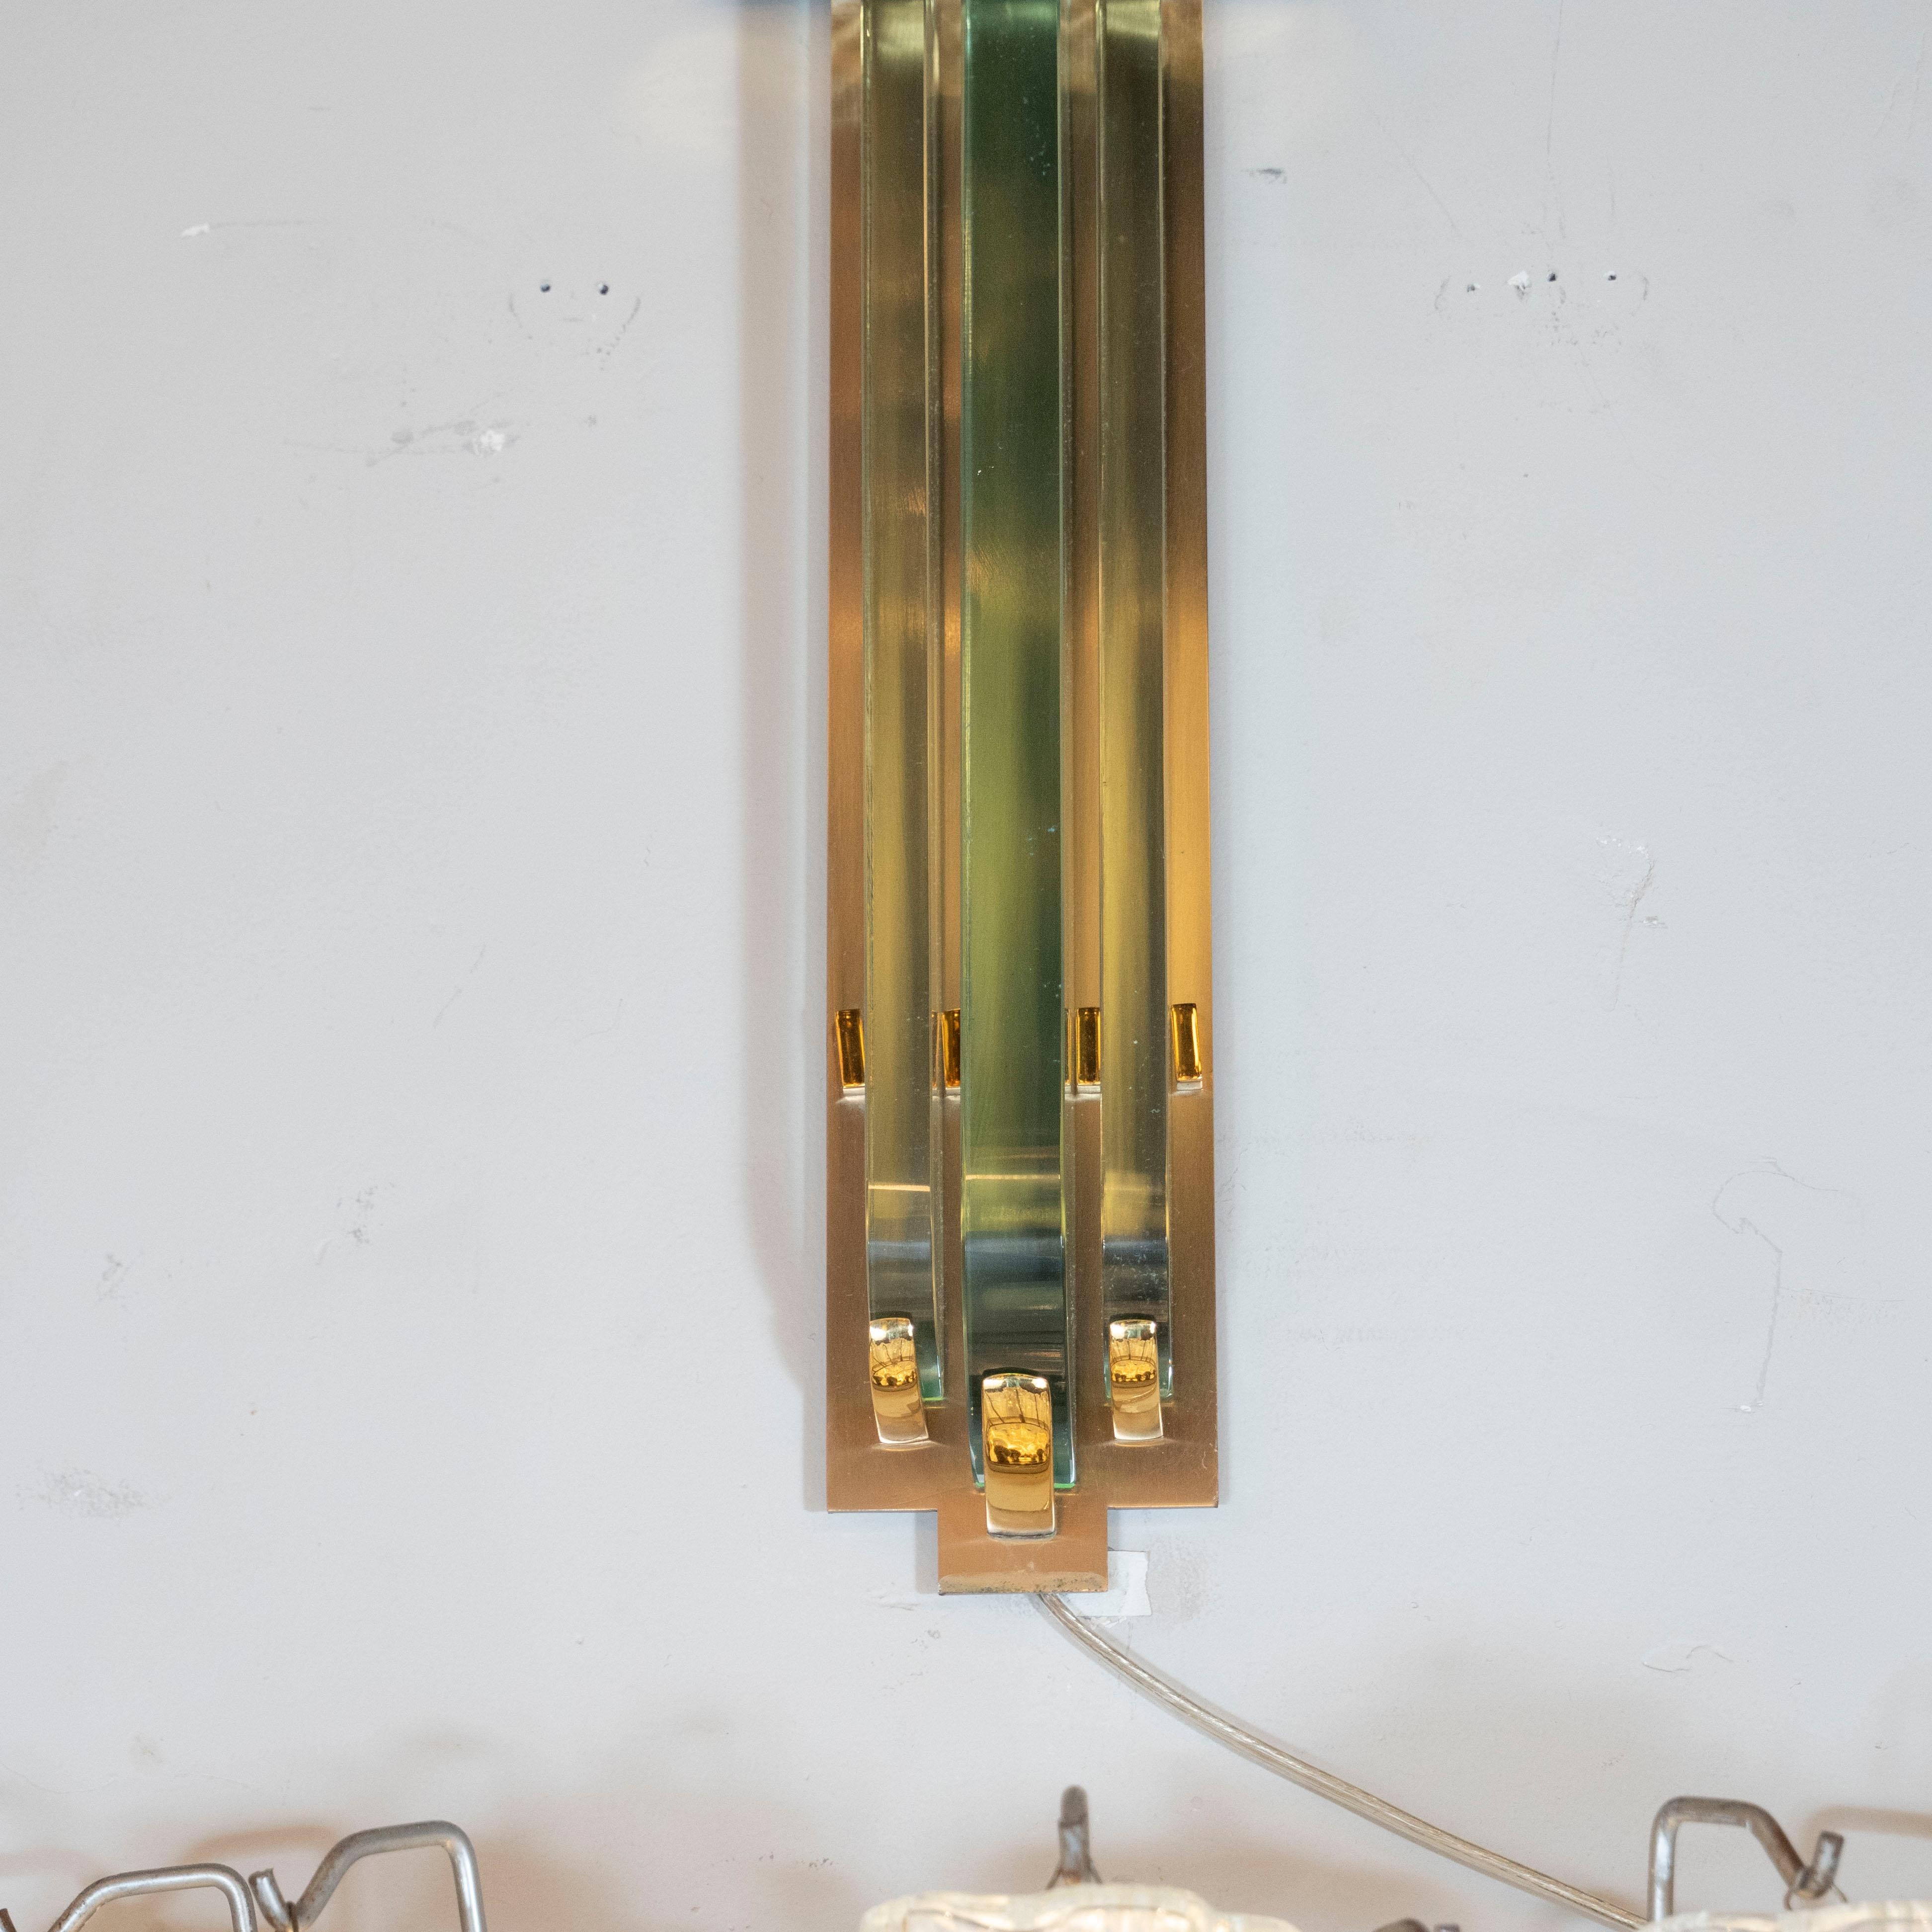 Late 20th Century Mid-Century Modern Art Deco Revival Contrasting Metallic Sconce For Sale